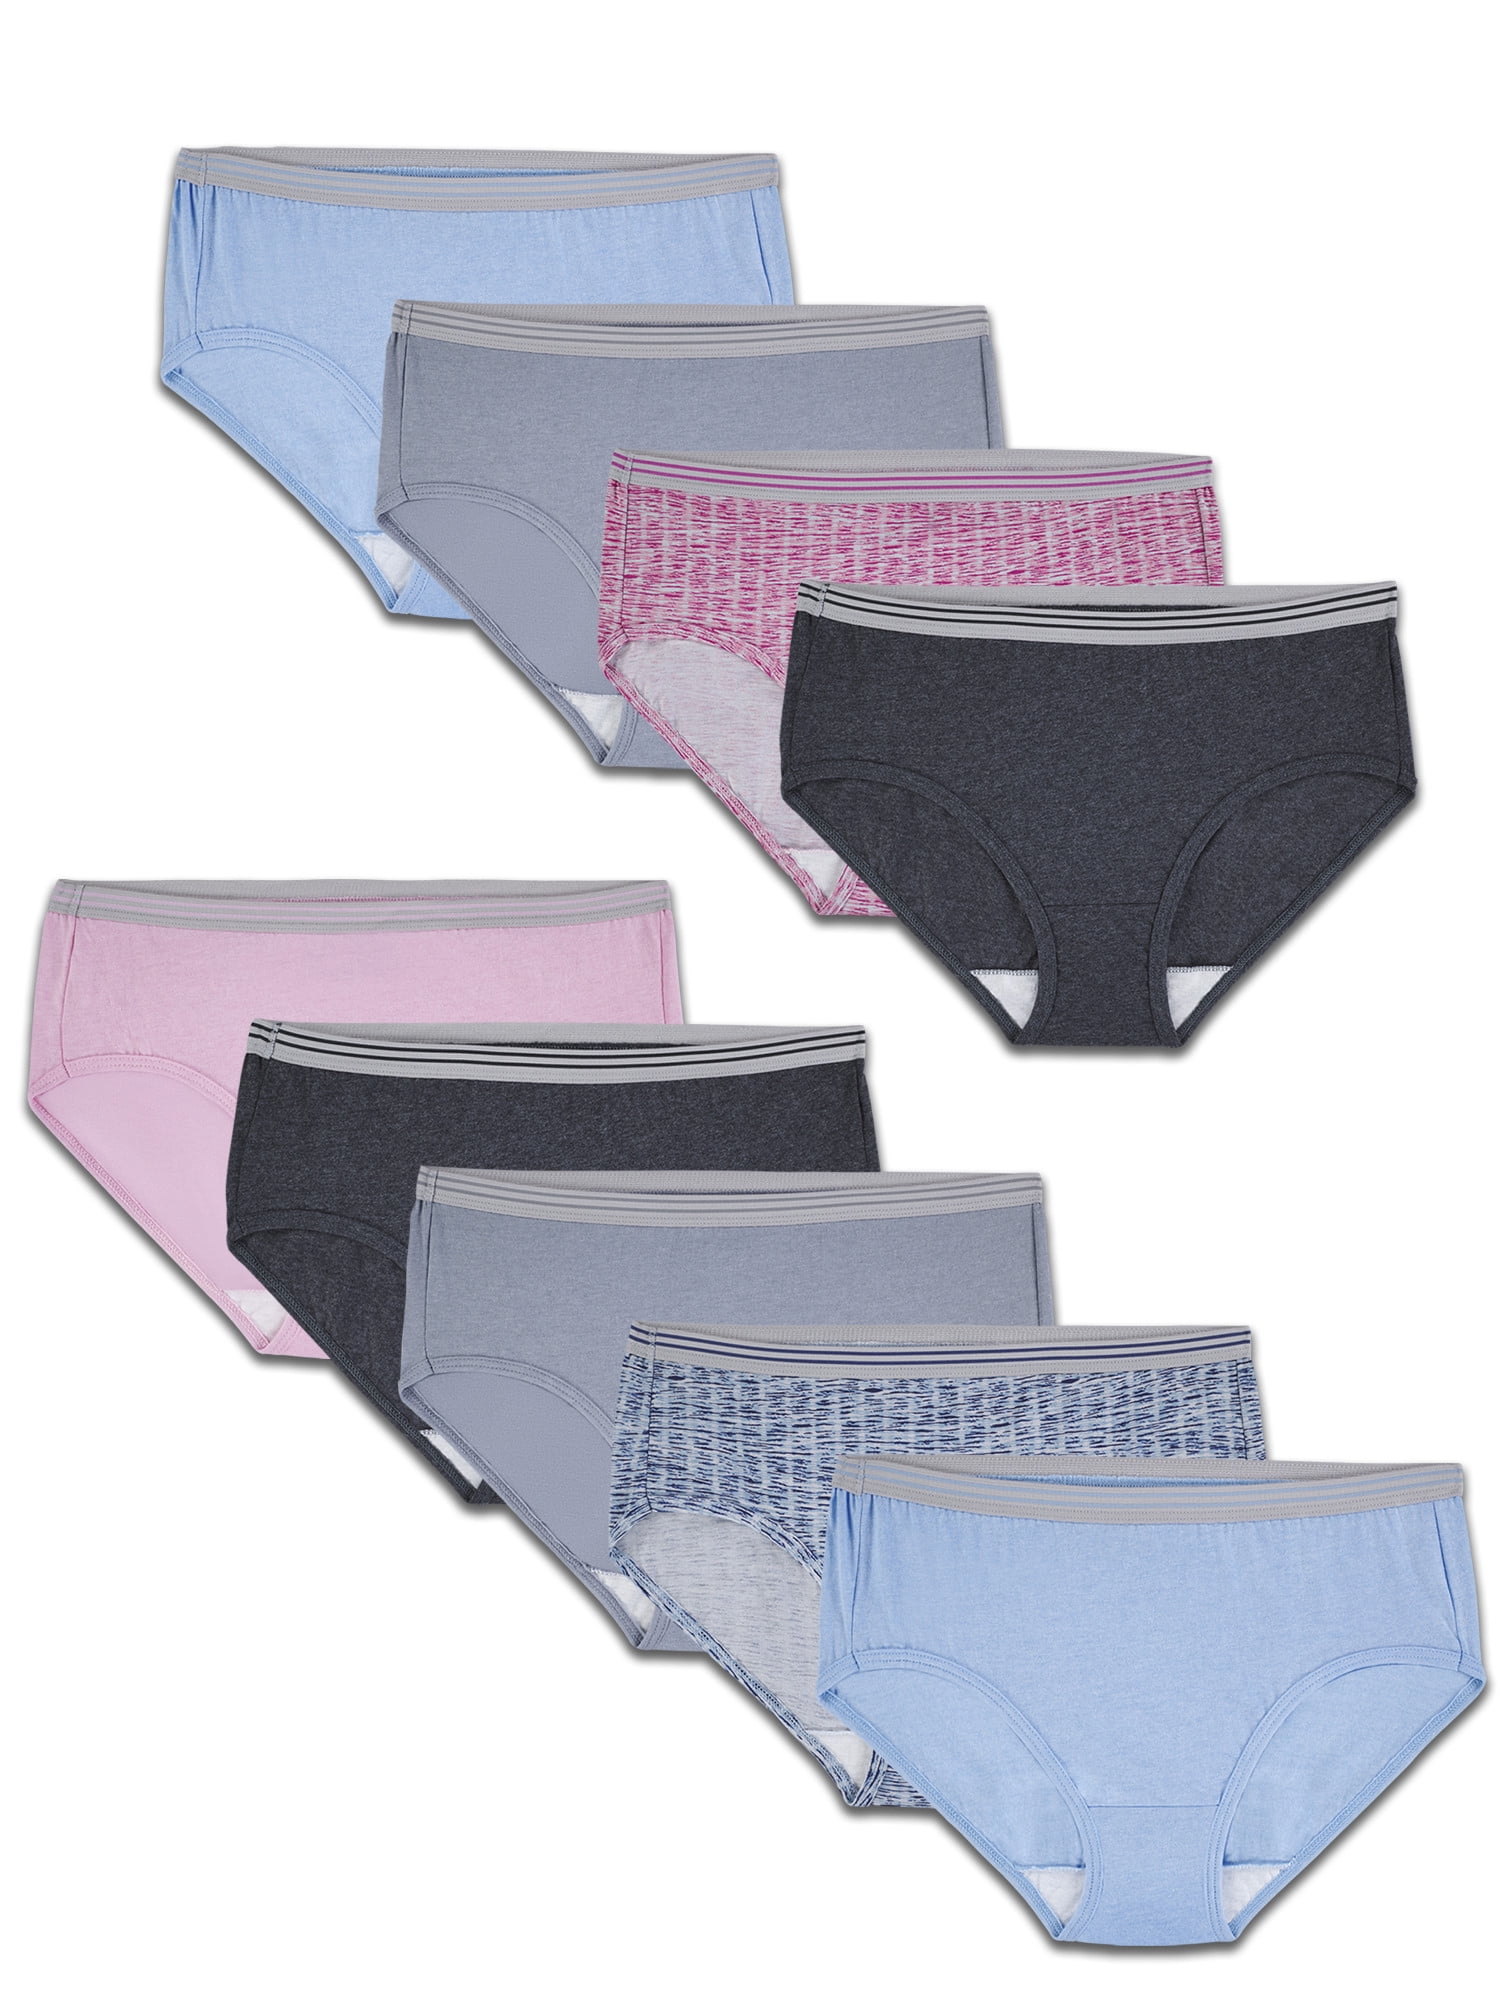 Women's Heather Low Rise Brief Panty, Assorted 6 Pack